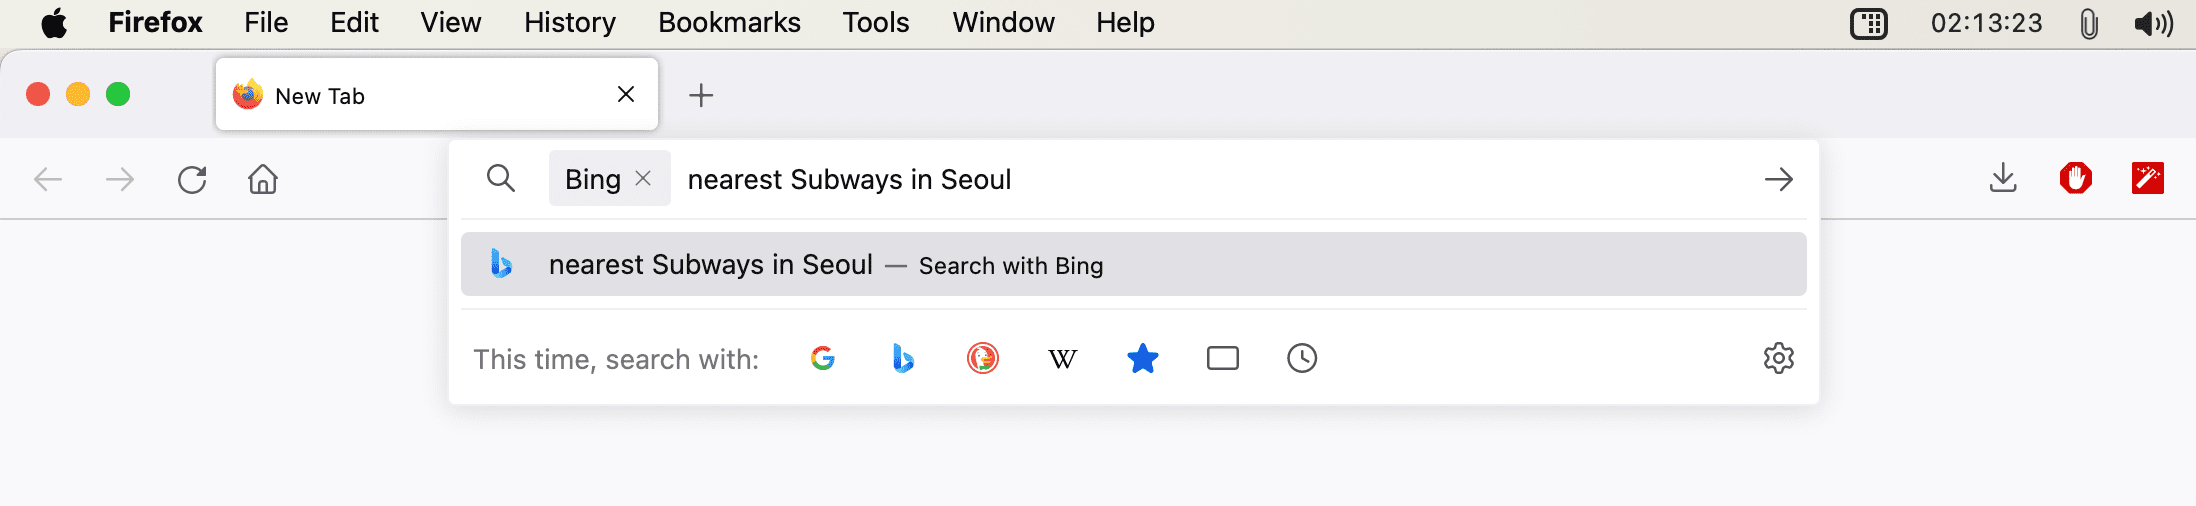 Searching with Bing in Firefox